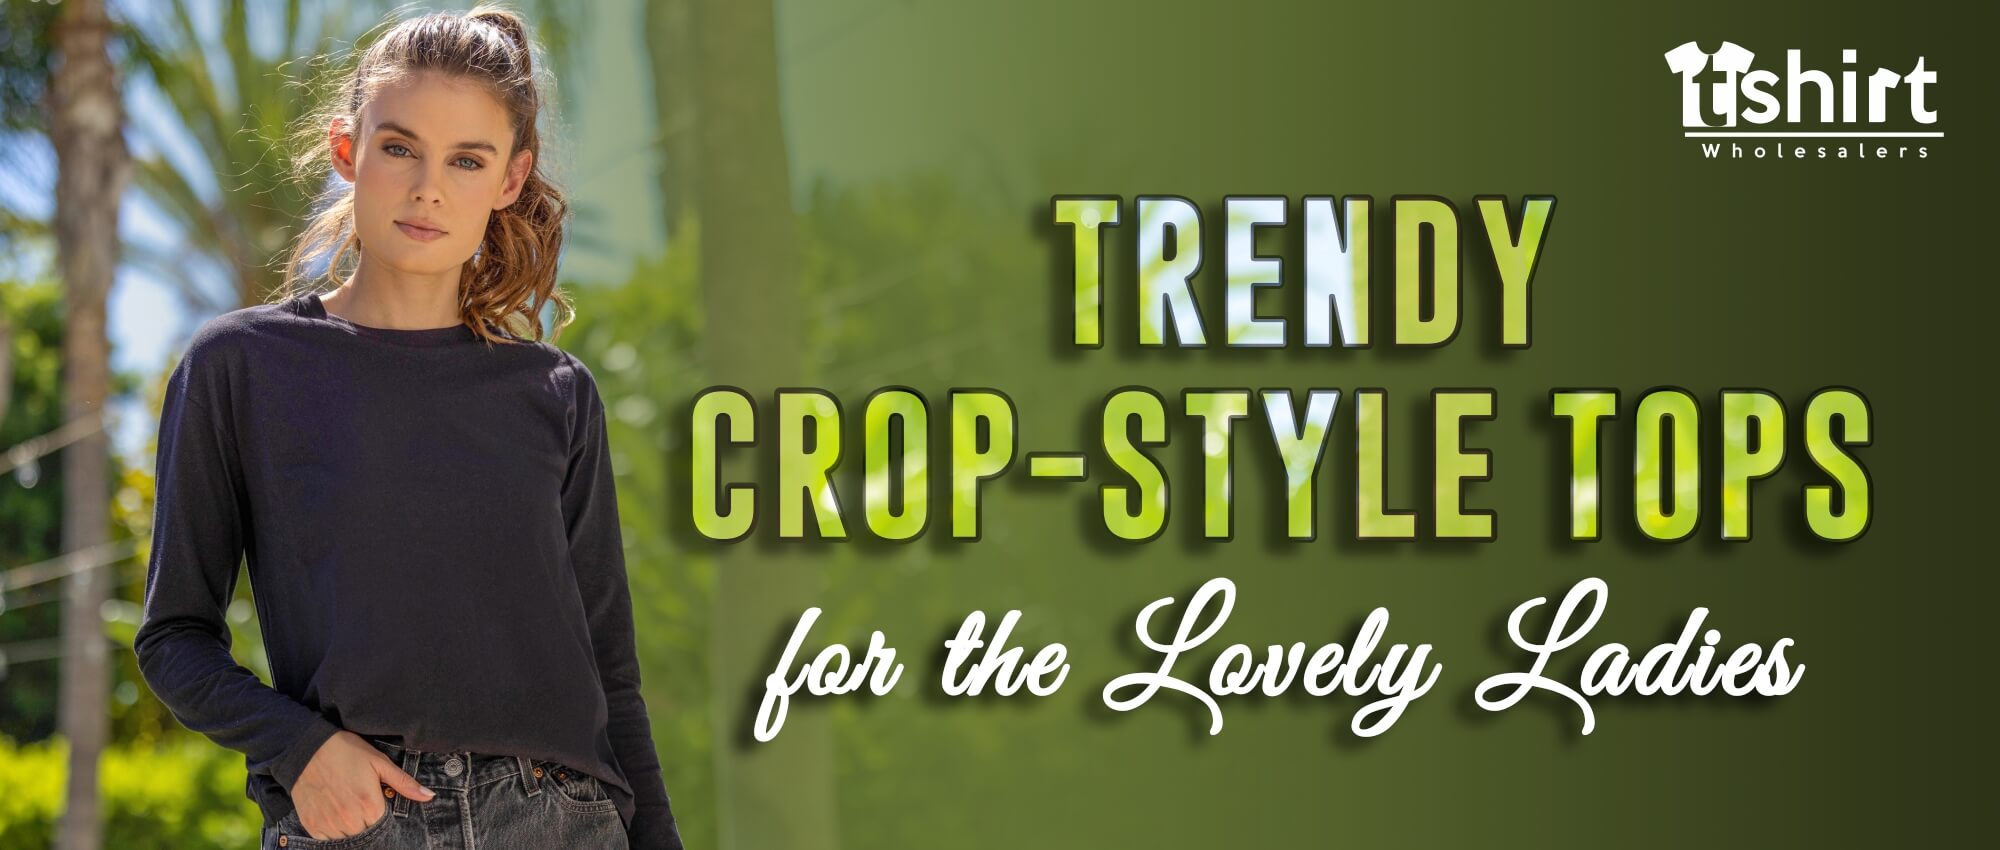 TRENDY CROP-STYLE TOPS FOR THE LOVELY LADIES